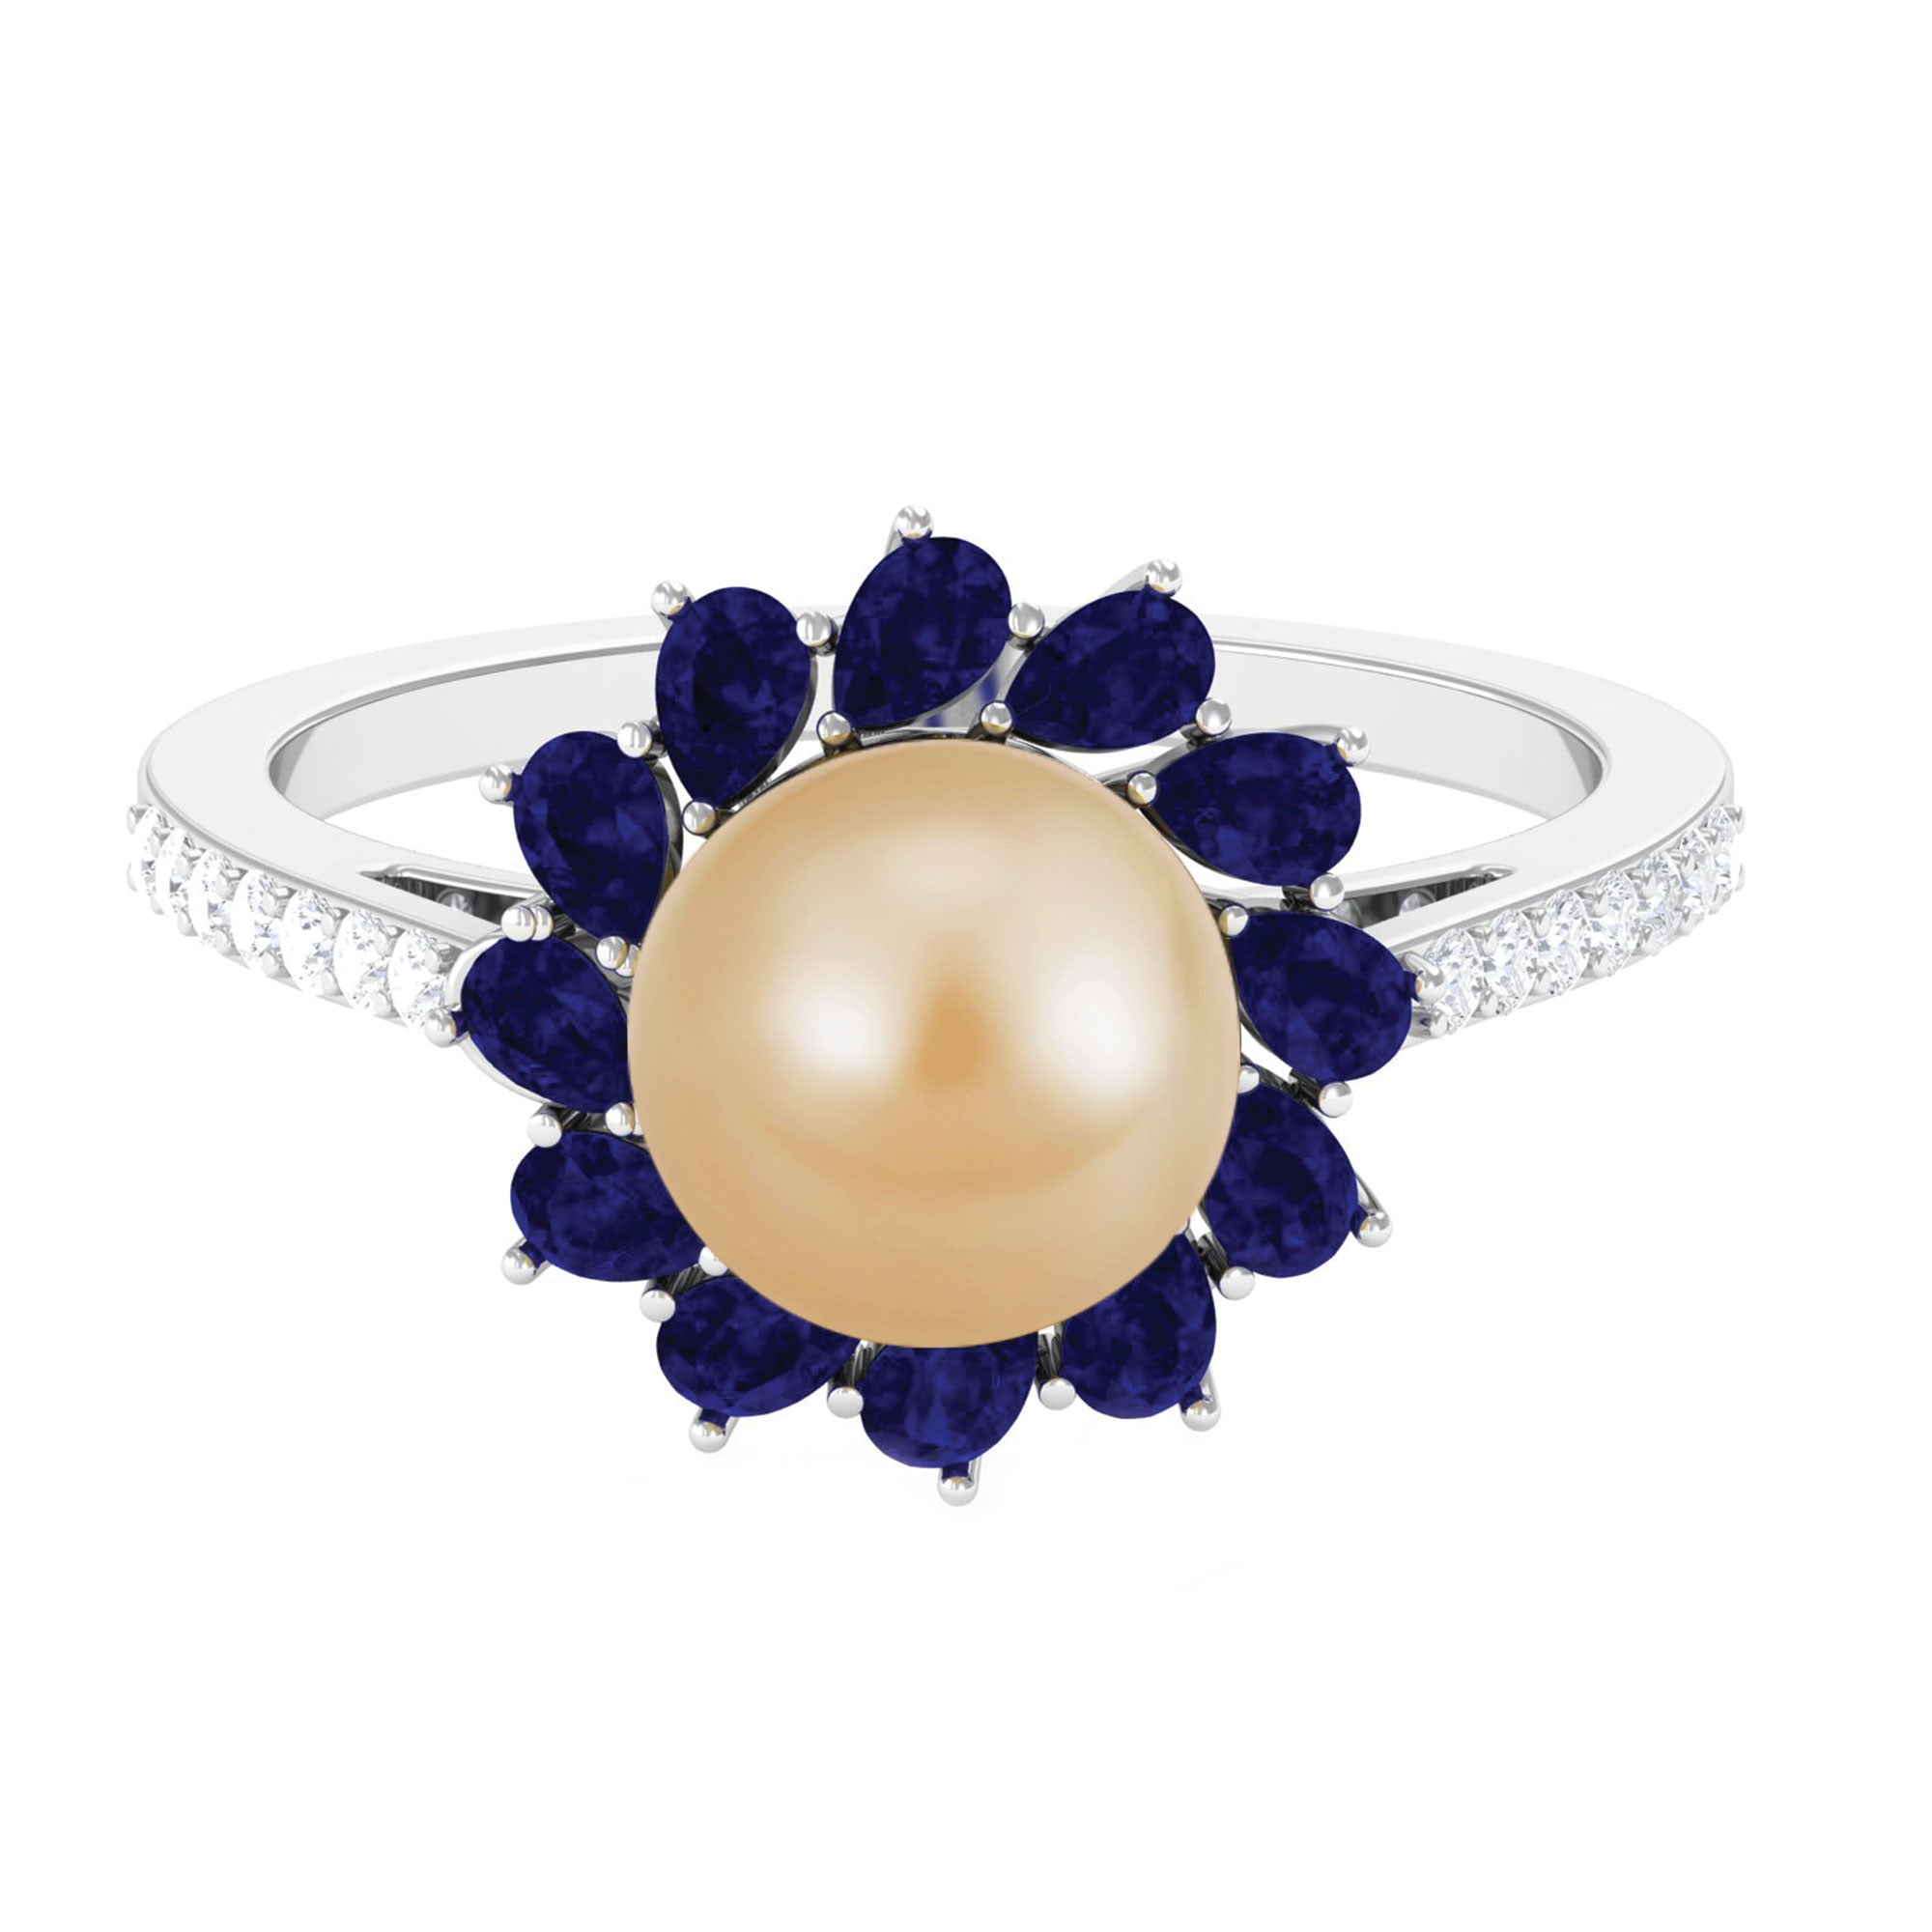 Golden South Sea Pearl Cocktail Halo Ring with Blue Sapphire South Sea Pearl-AAAA Quality - Arisha Jewels